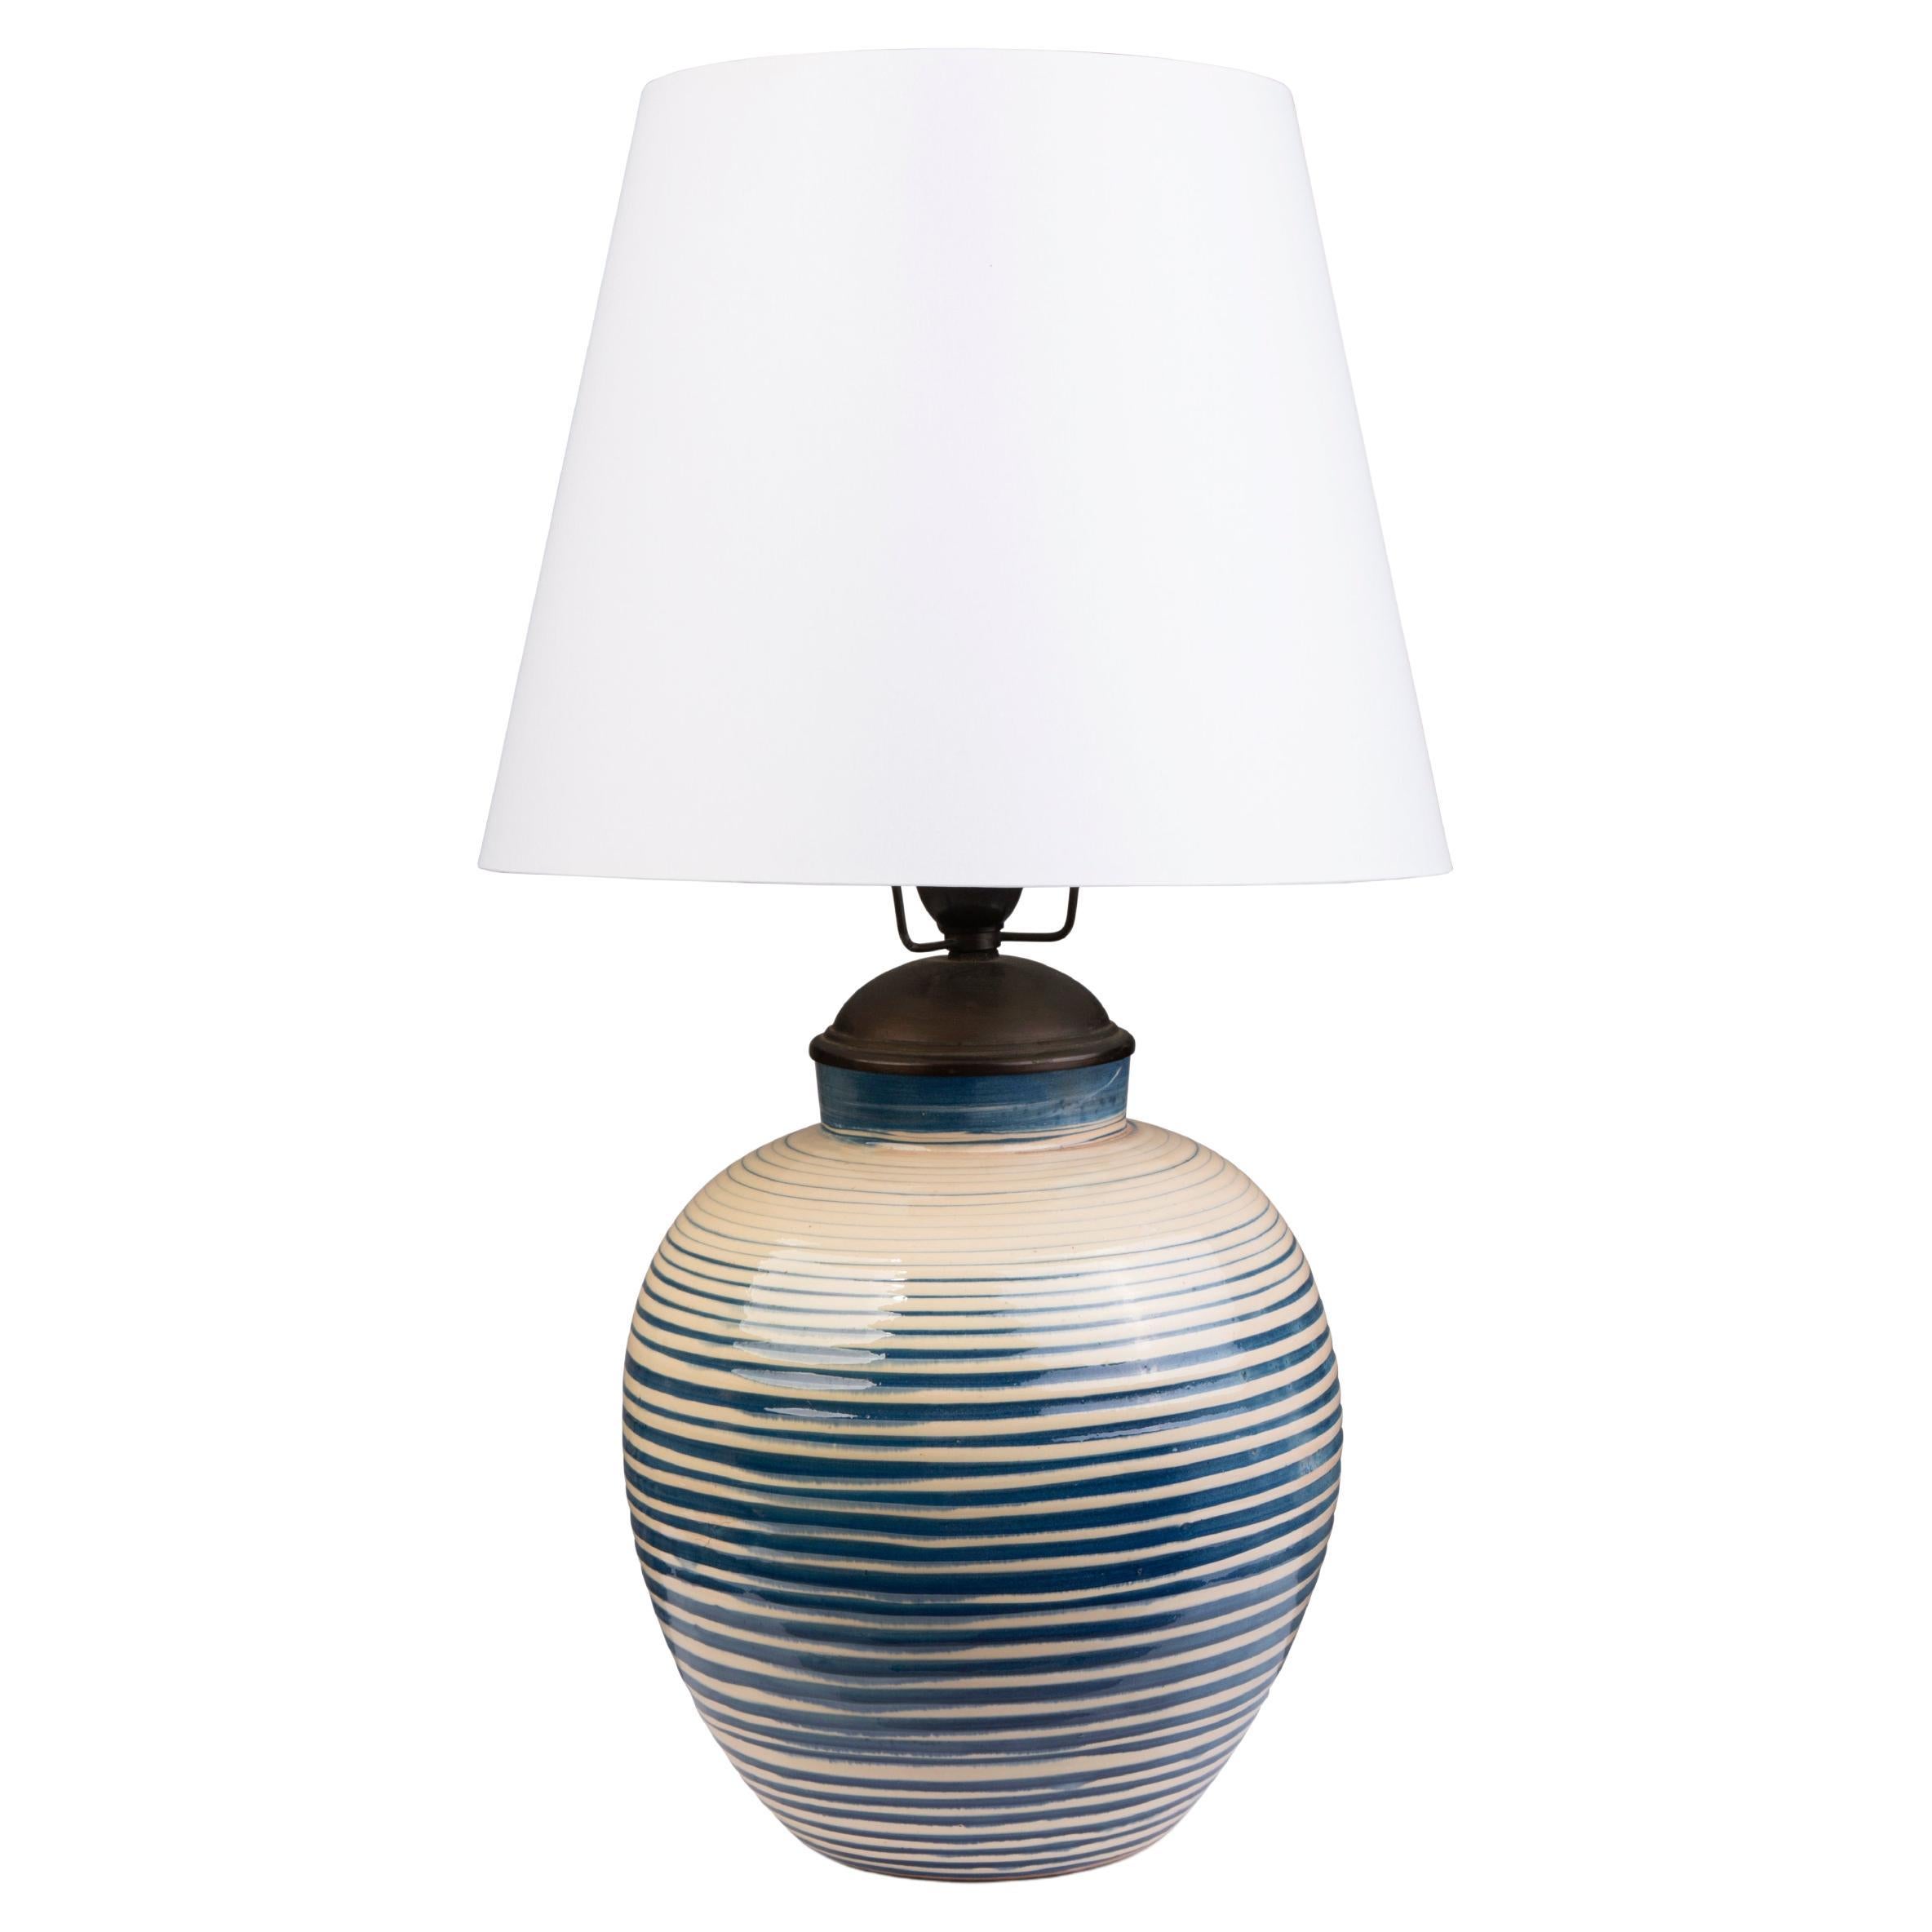 Large round table lamp with horizontal blue stripes on a creamy background For Sale